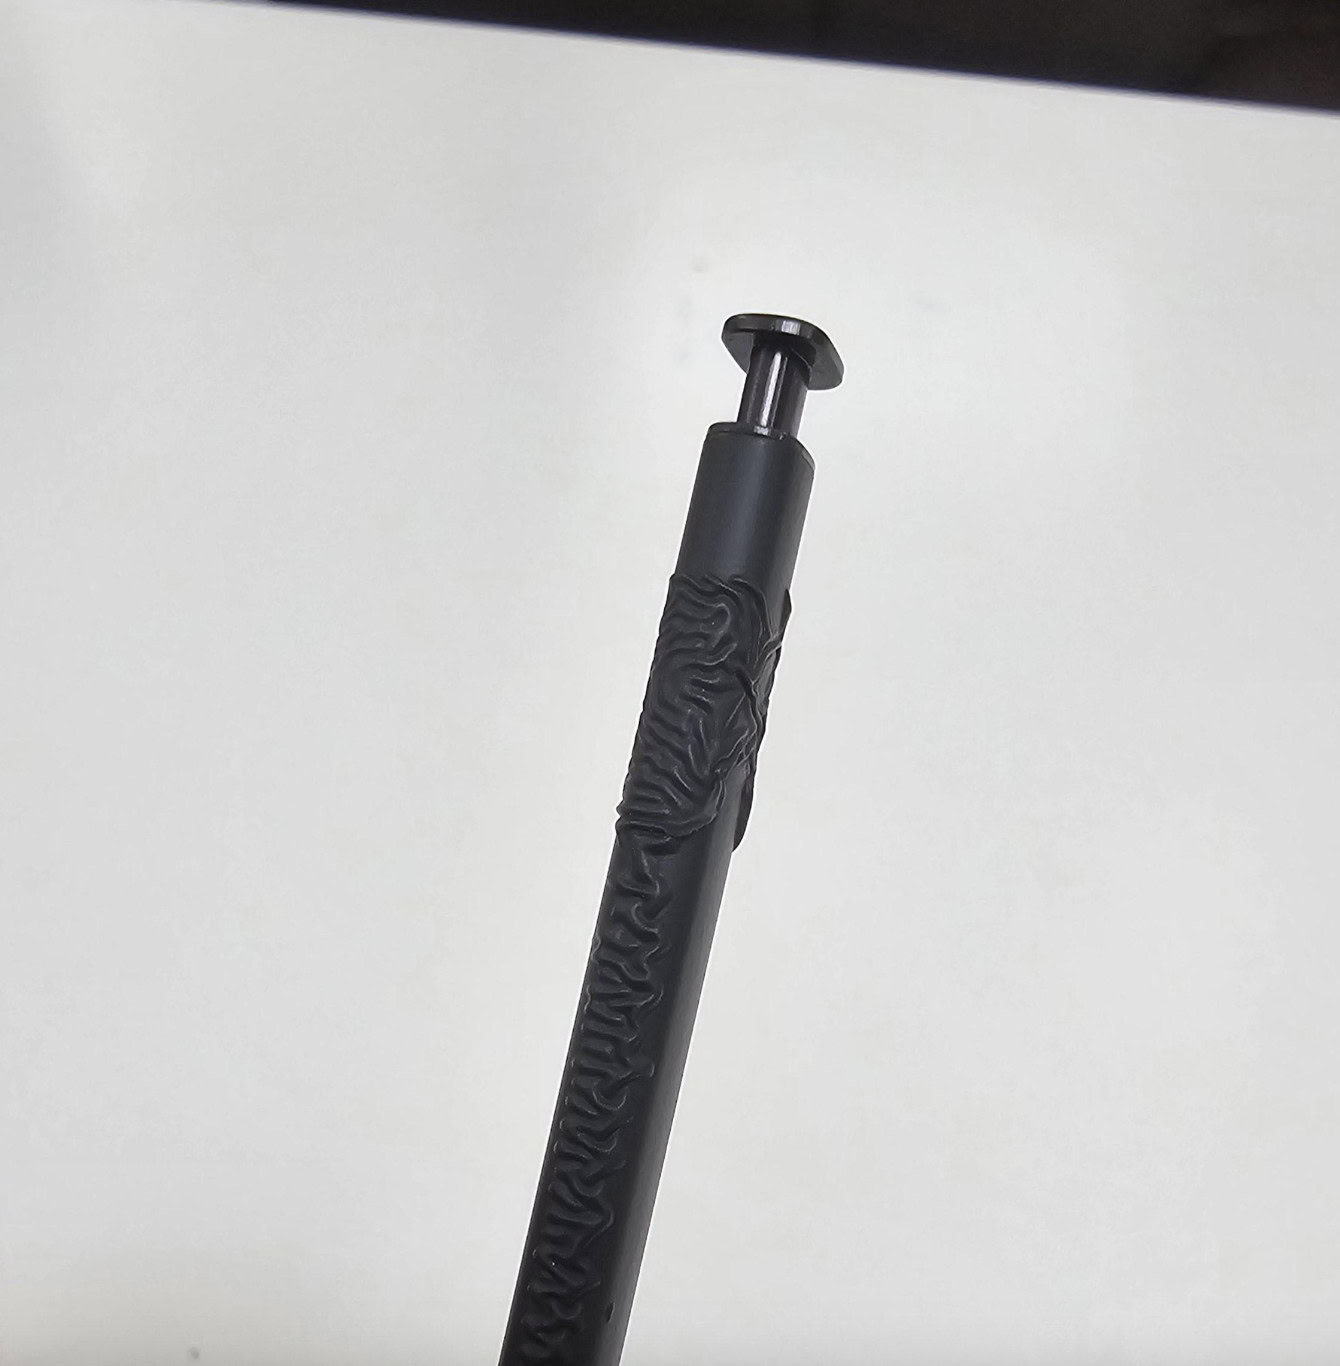 S Pen has a rippled texture because of contact with UV glue